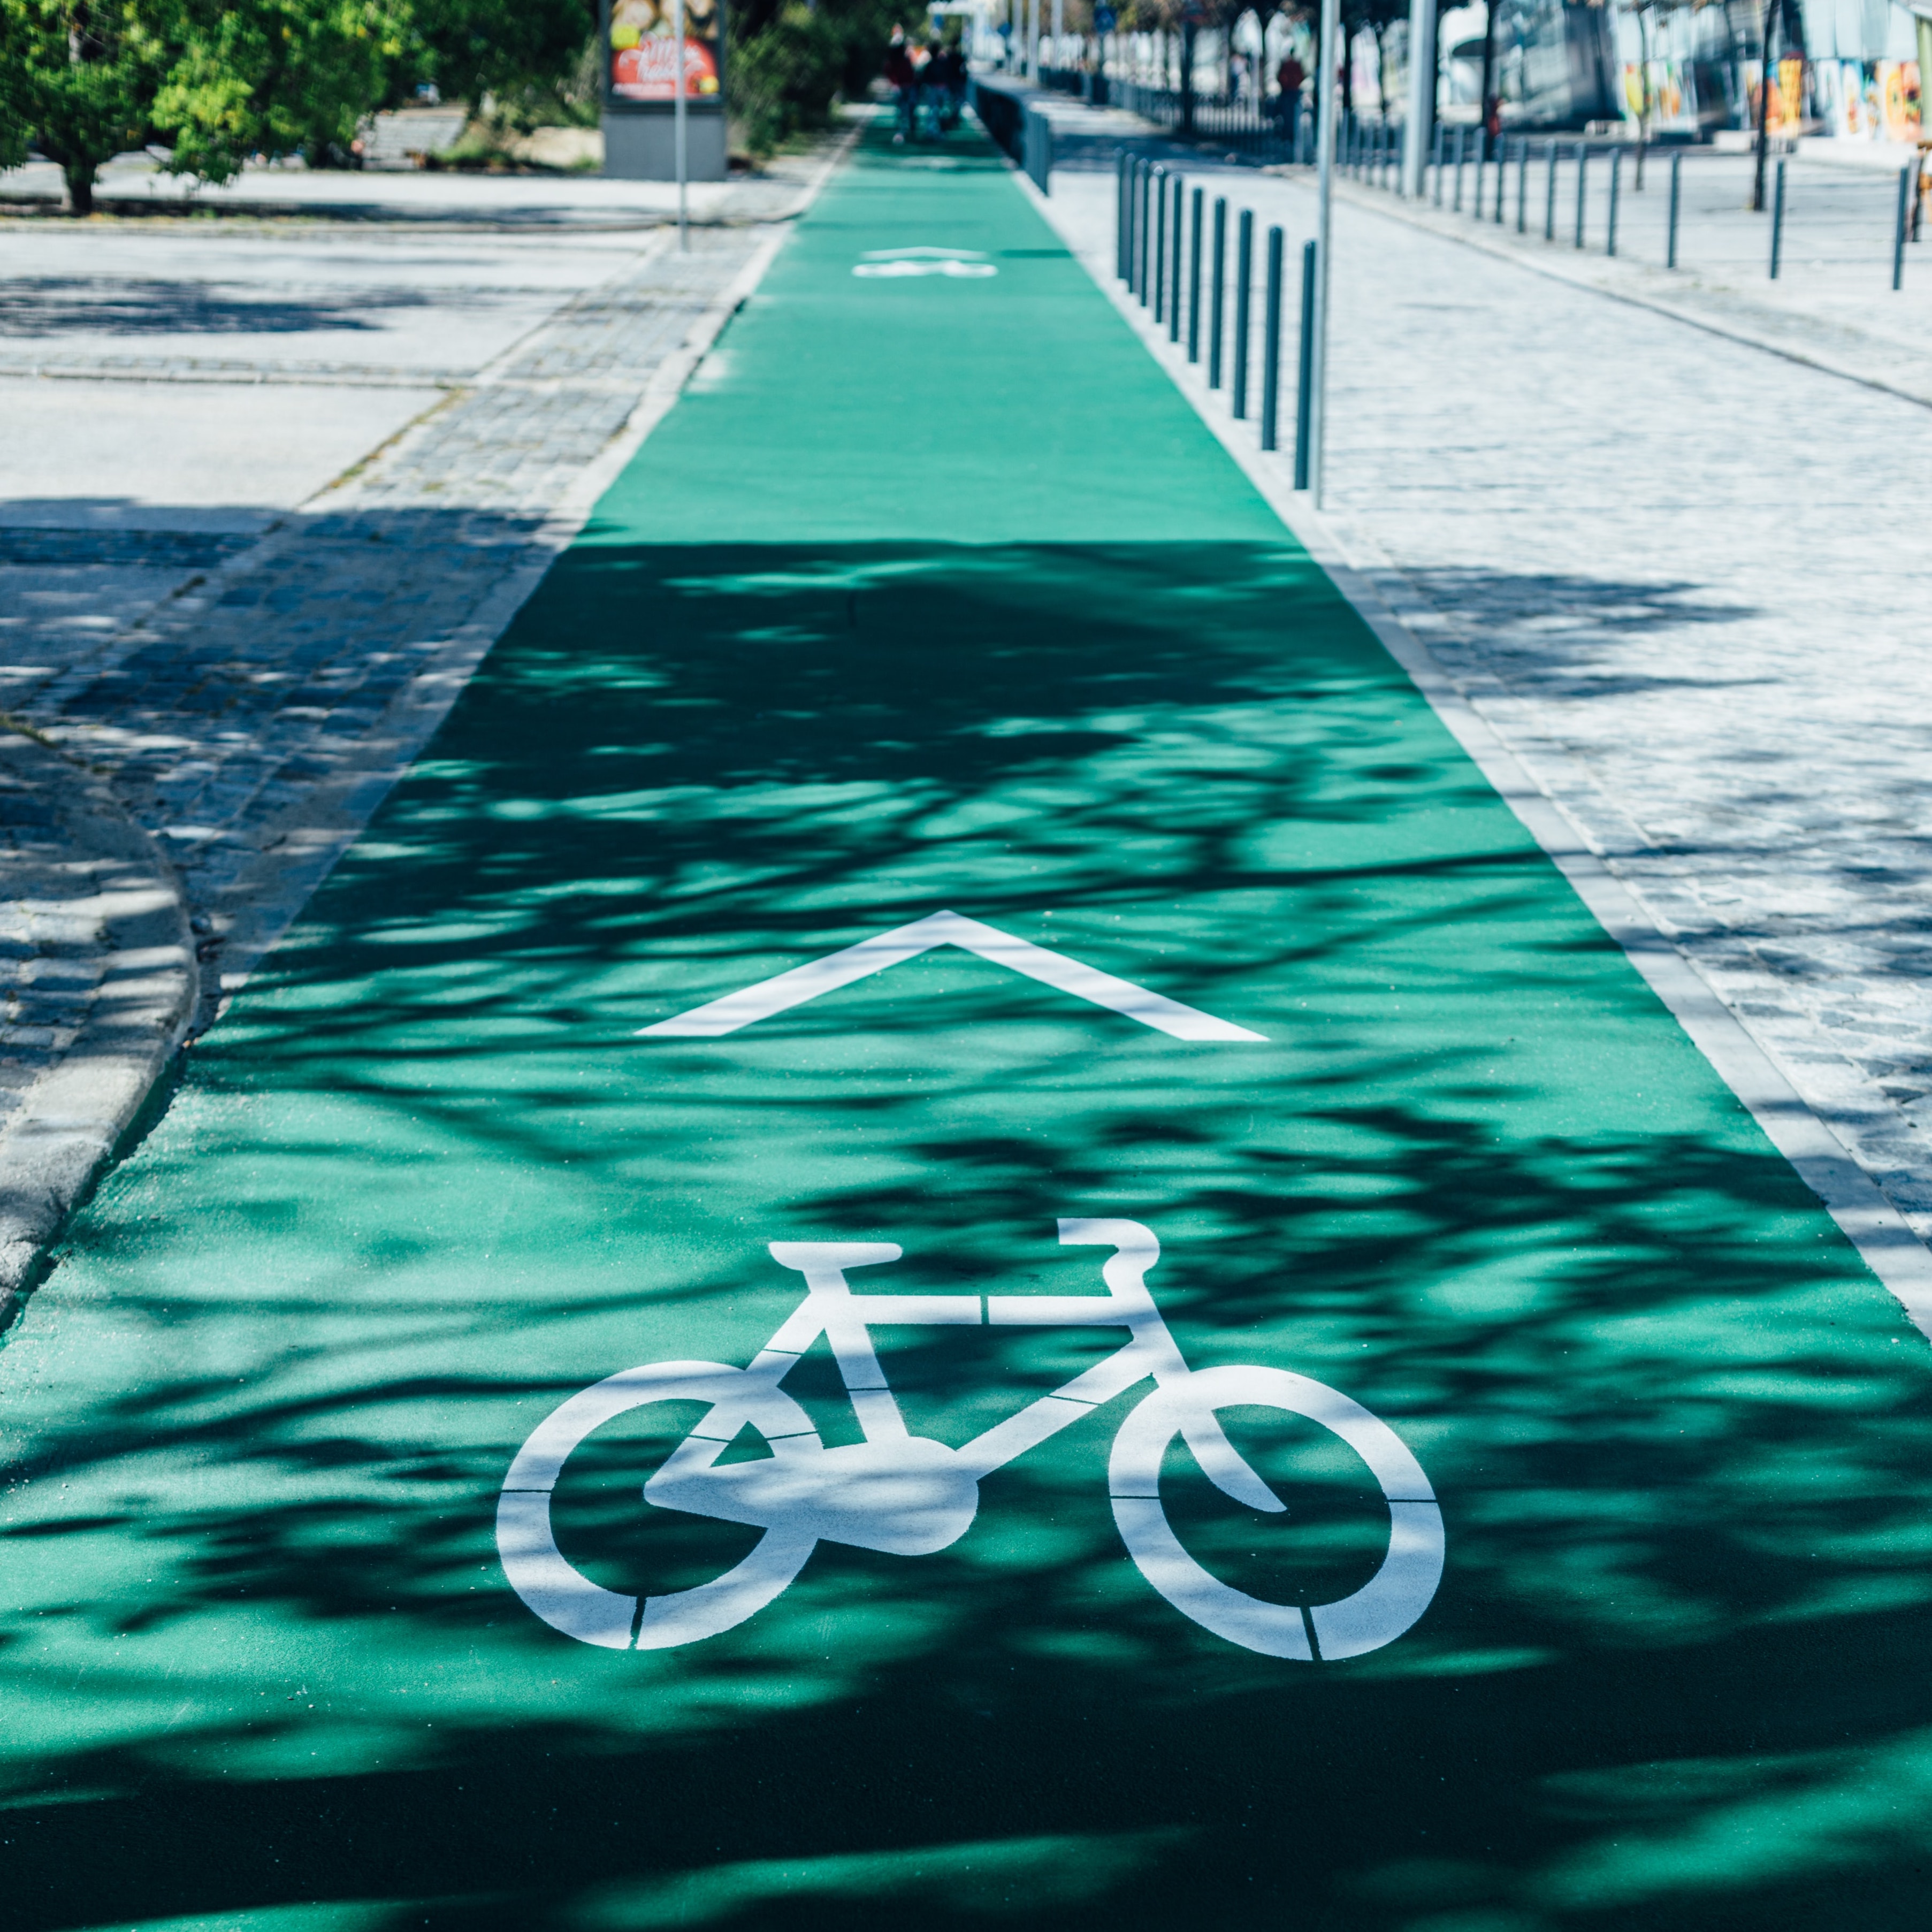 Is cycling infrastructure the missing link in multimodality?